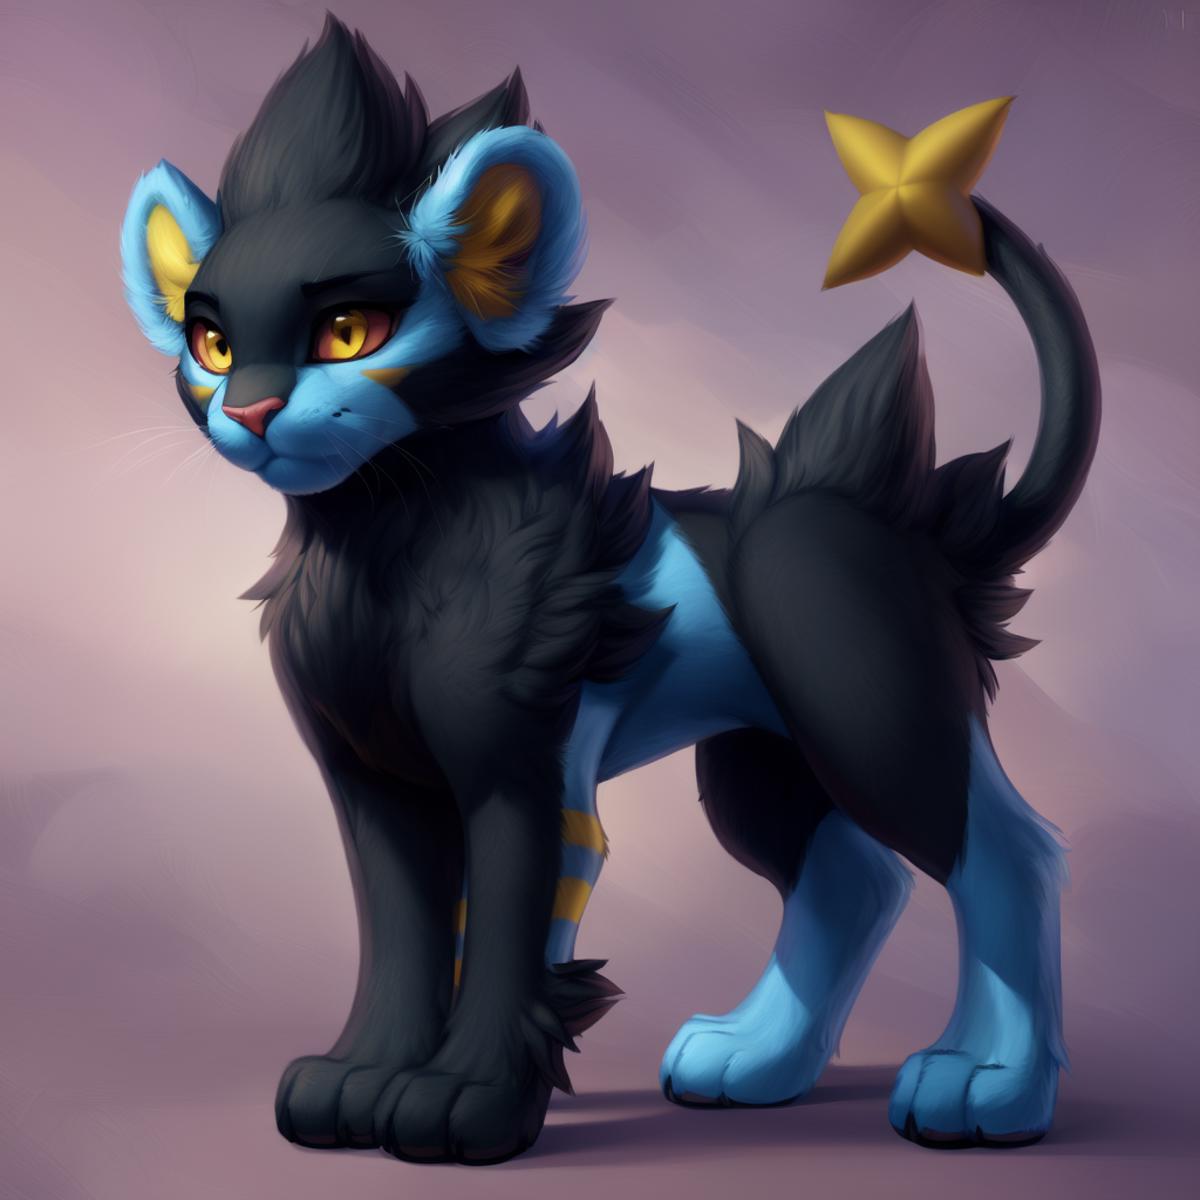 Luxray - Pokemon image by Orion_12